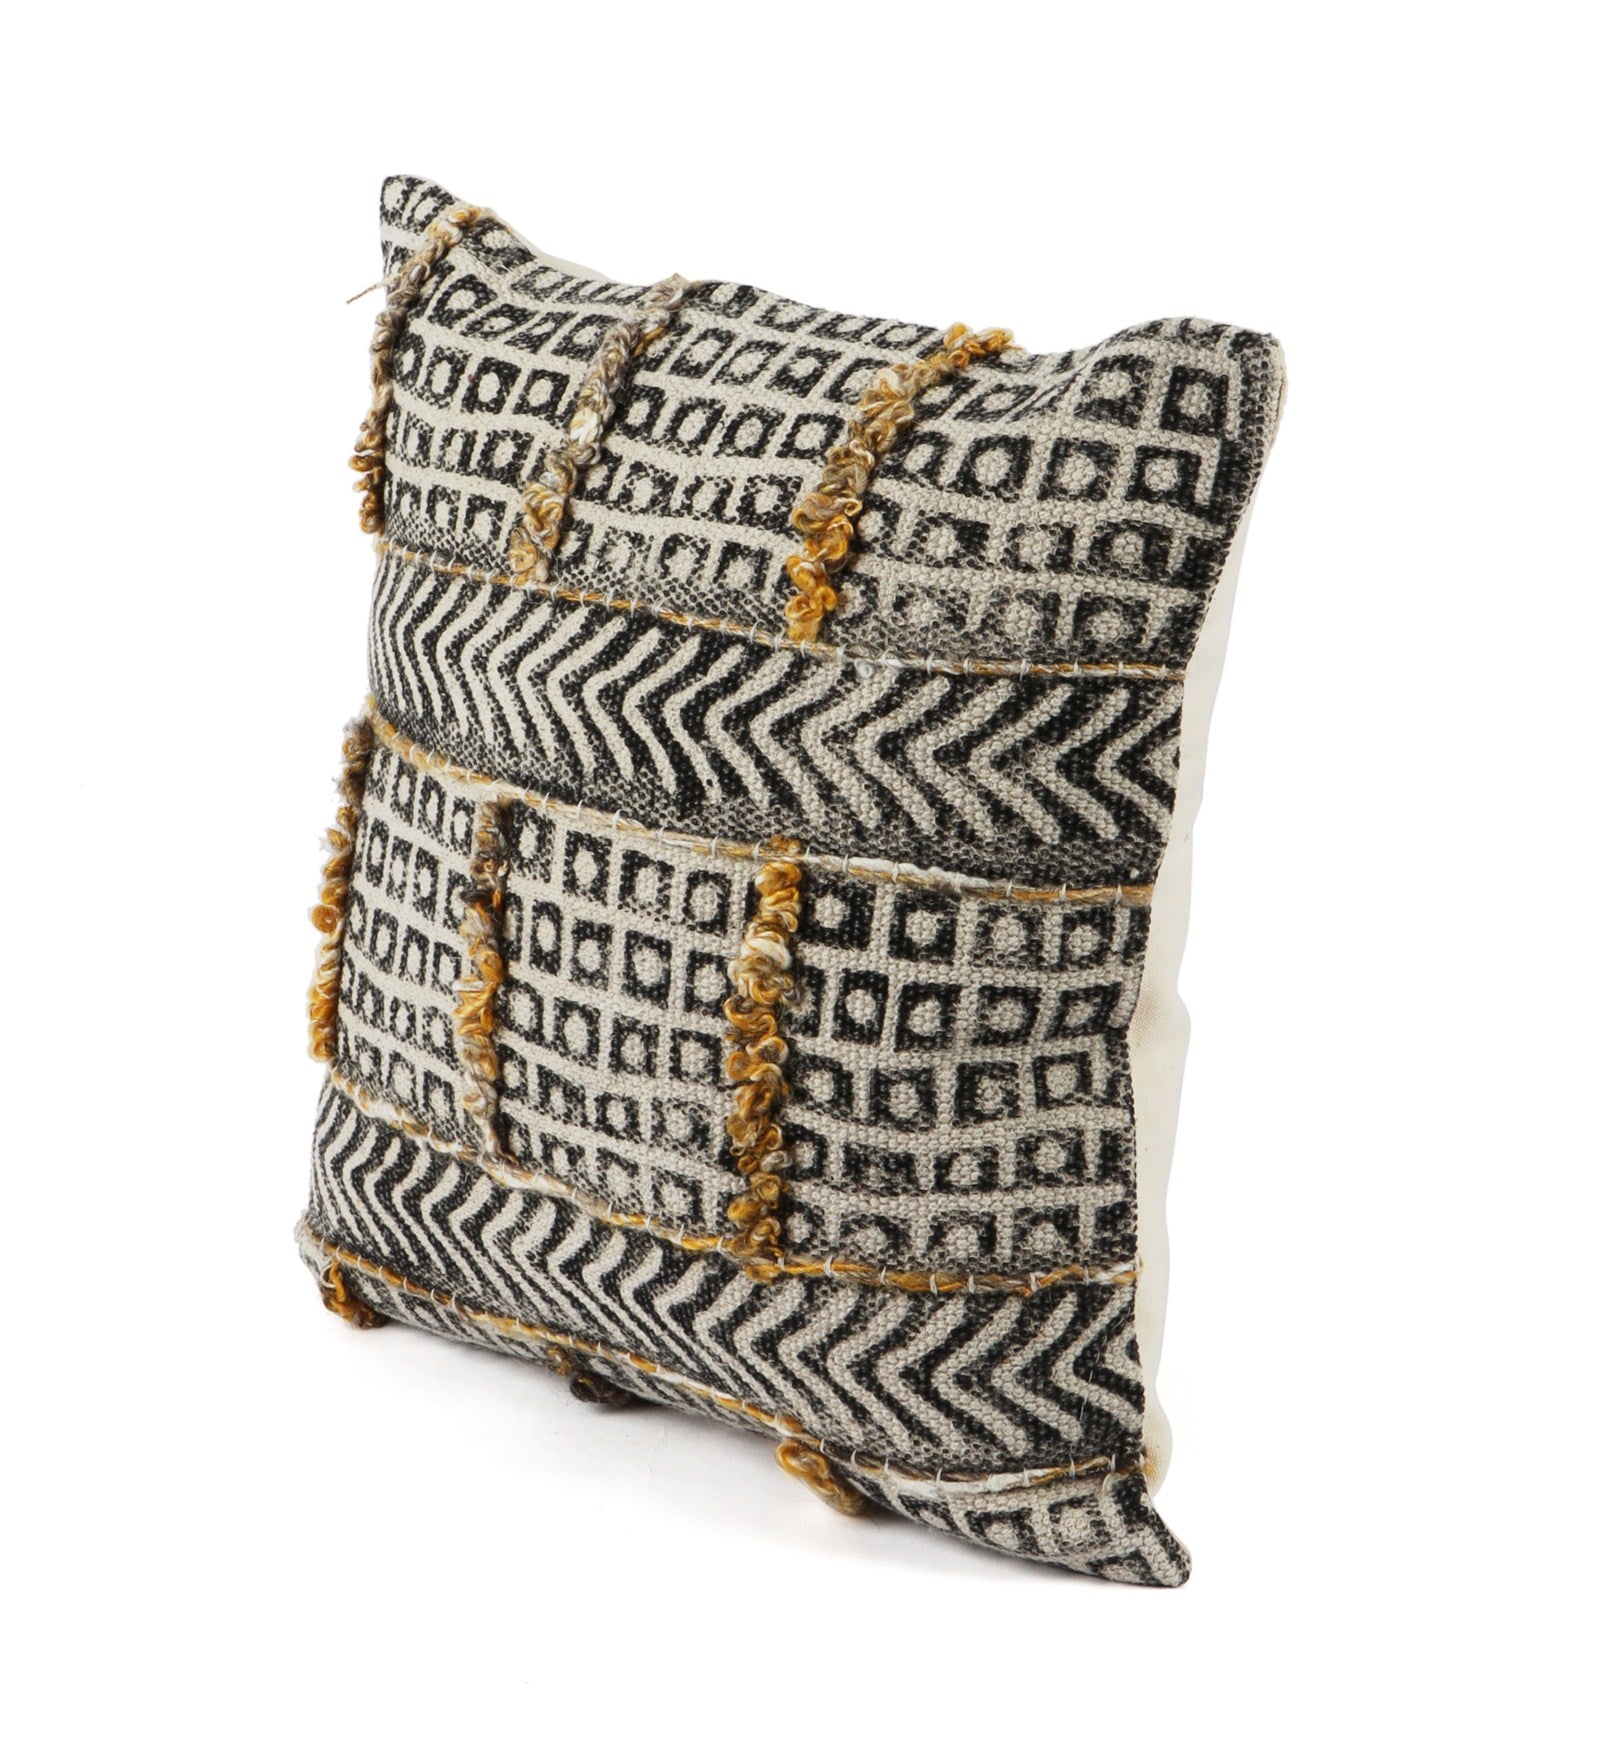 Embroidered Contemporary Cushion Cover (Black-Beige Square)